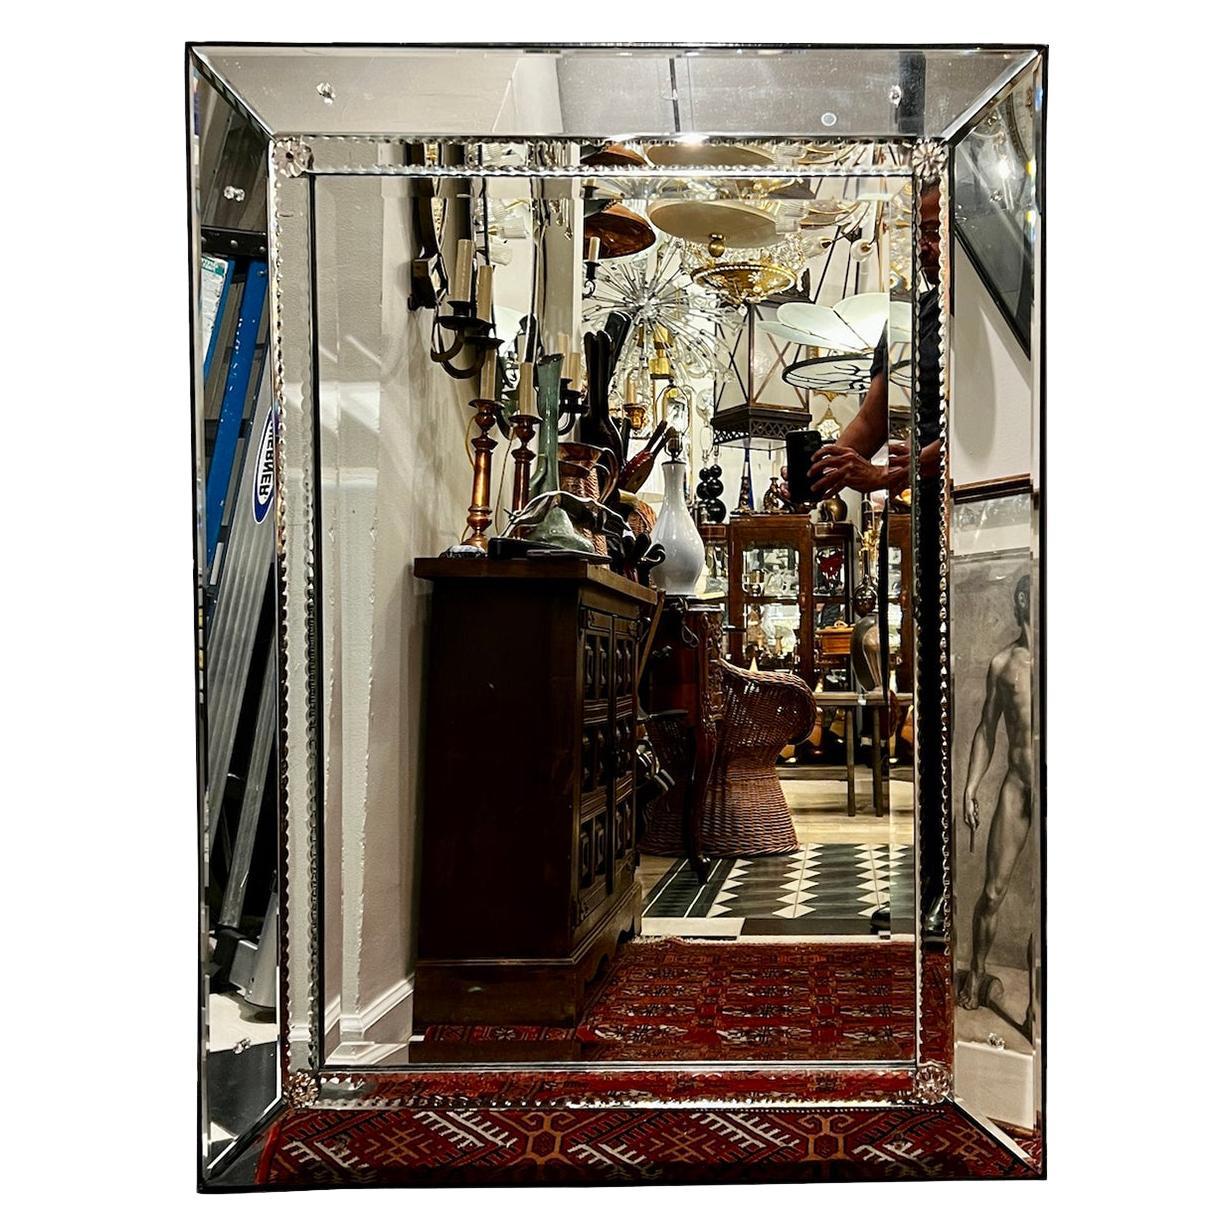 A circa 1950's French etched mirror with beveled frame.

Measurements:
Height: 48.5